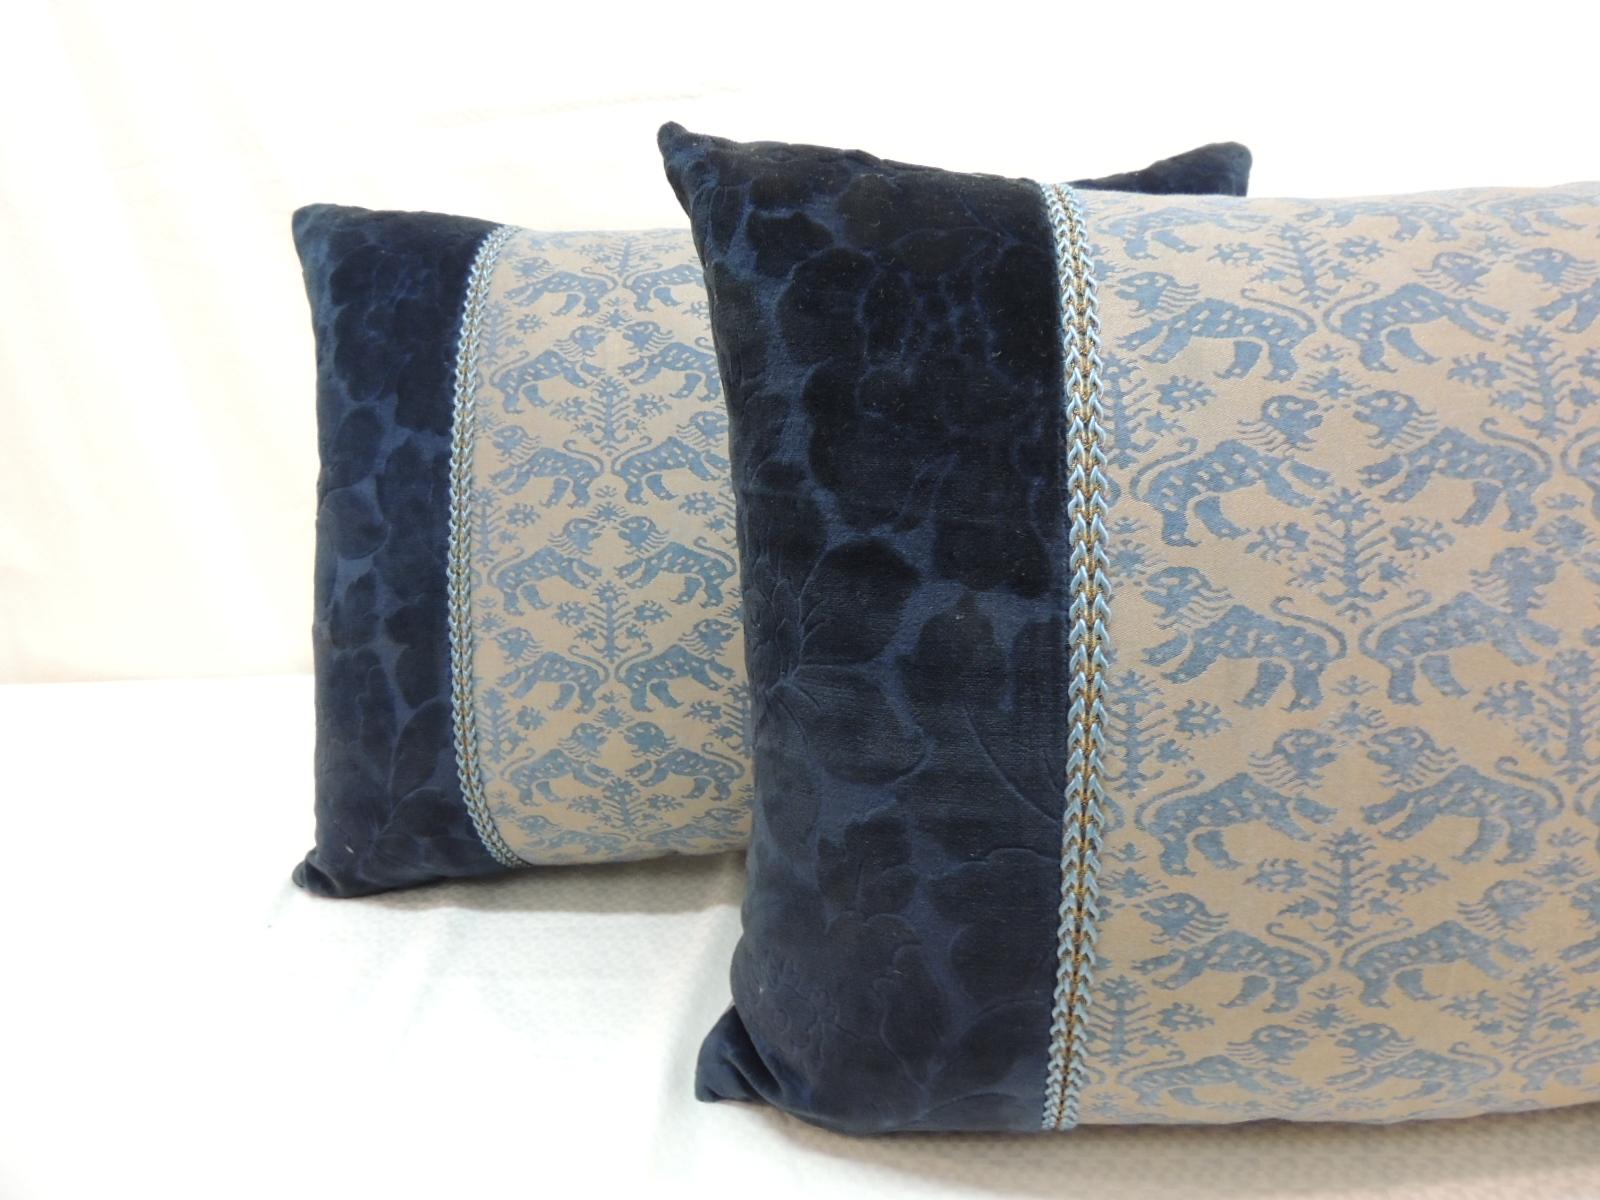 Vintage Fortuny “Richelieu” blue on silver decorative bolster pillow, framed with antique cotton floral velvet and embellished with antique silver metallic tape trim. Accentuated with silk rope trim. Golden silk backing.
Decorative pillow